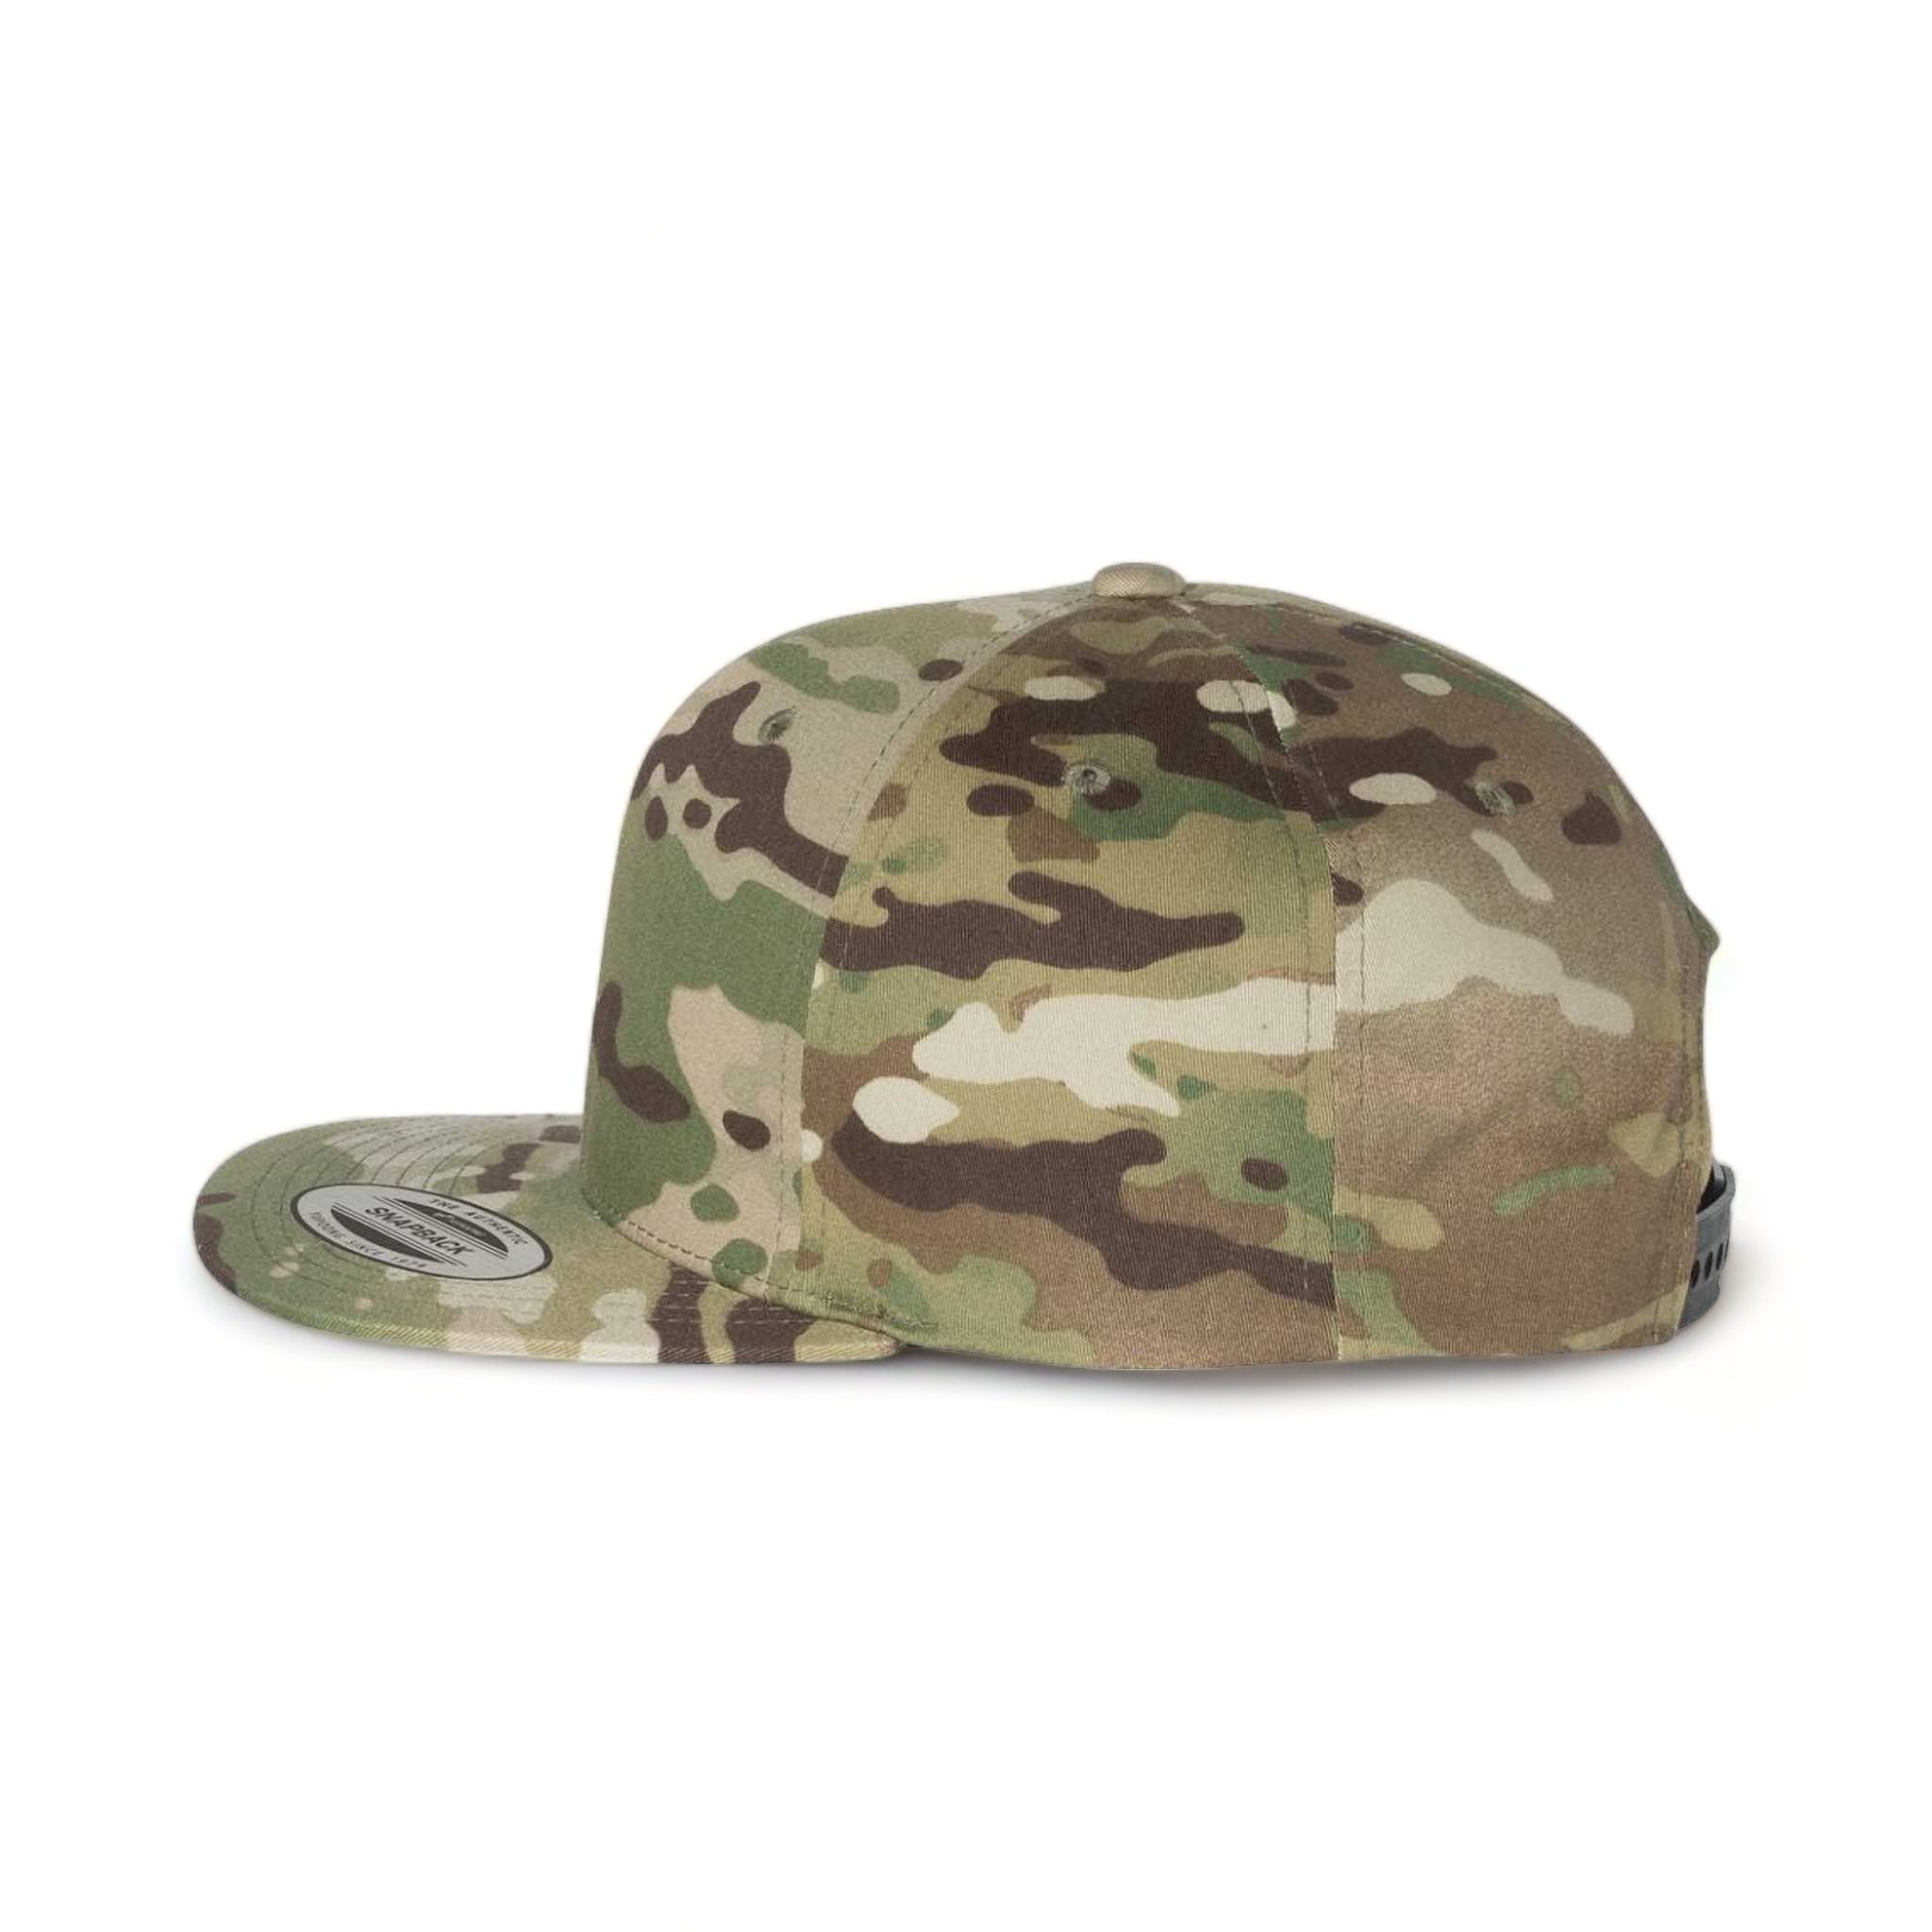 Side view of YP Classics 6089M custom hat in multicam green